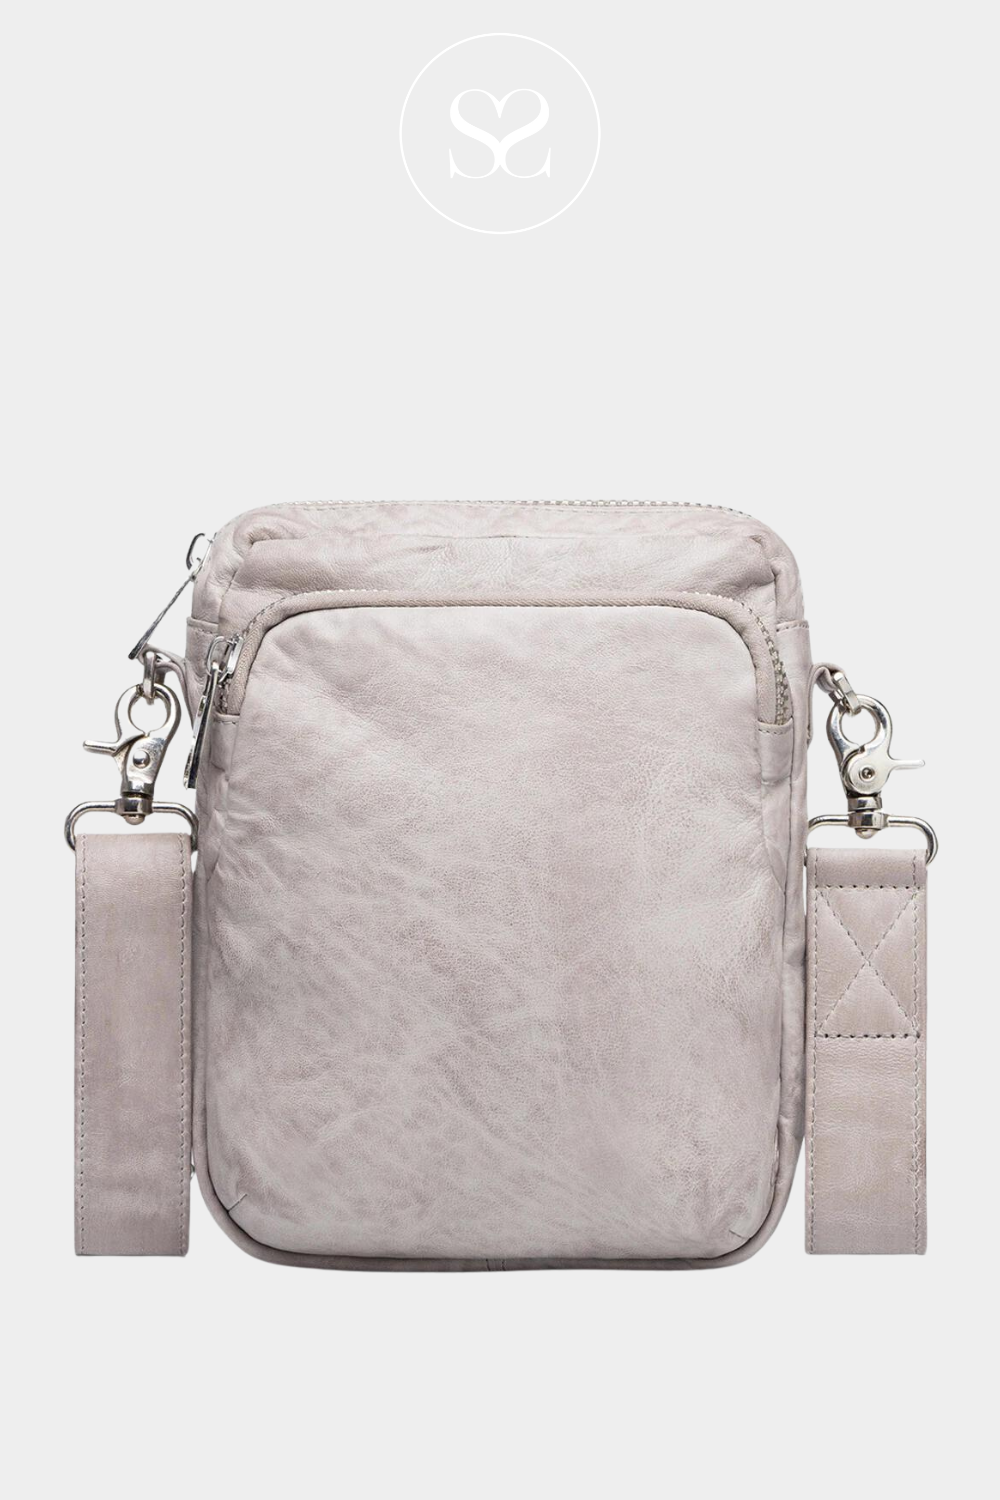 grey leather crossbody phone bag from depeche